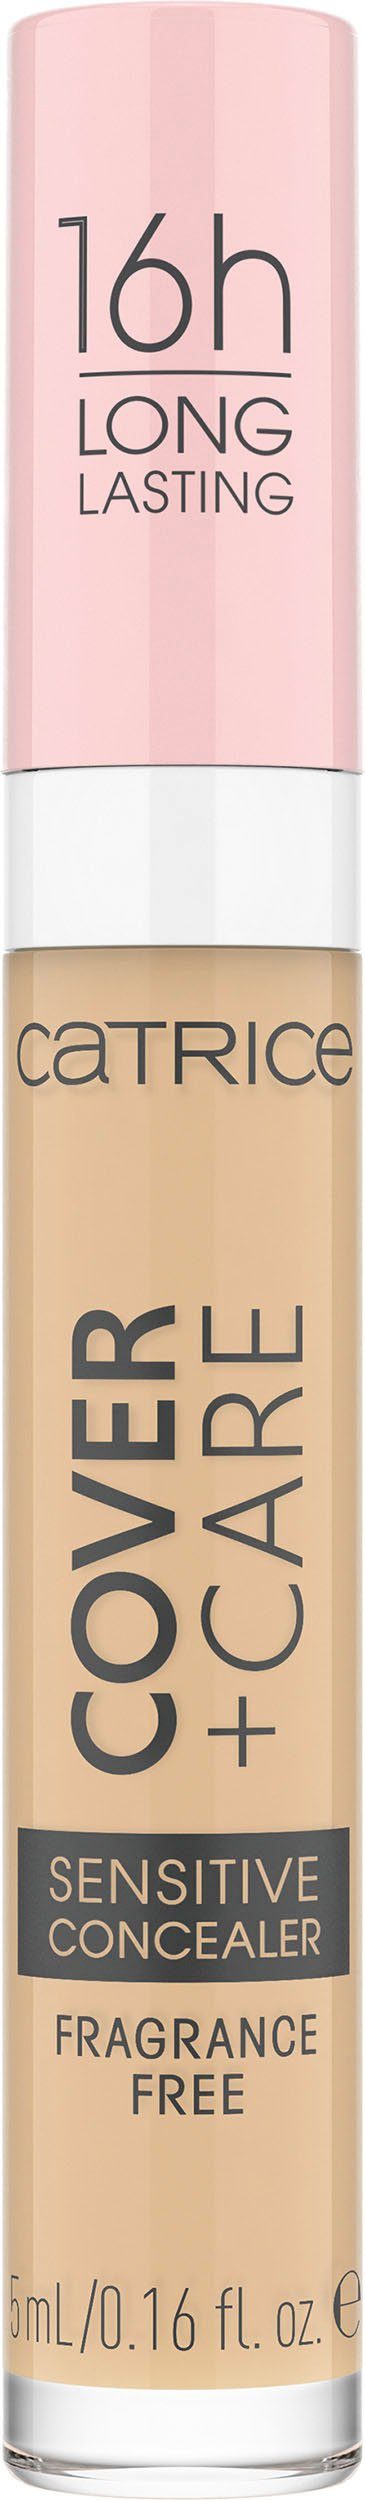 Concealer Sensitive nude 008W 3-tlg. Catrice Concealer, Catrice Care + Cover